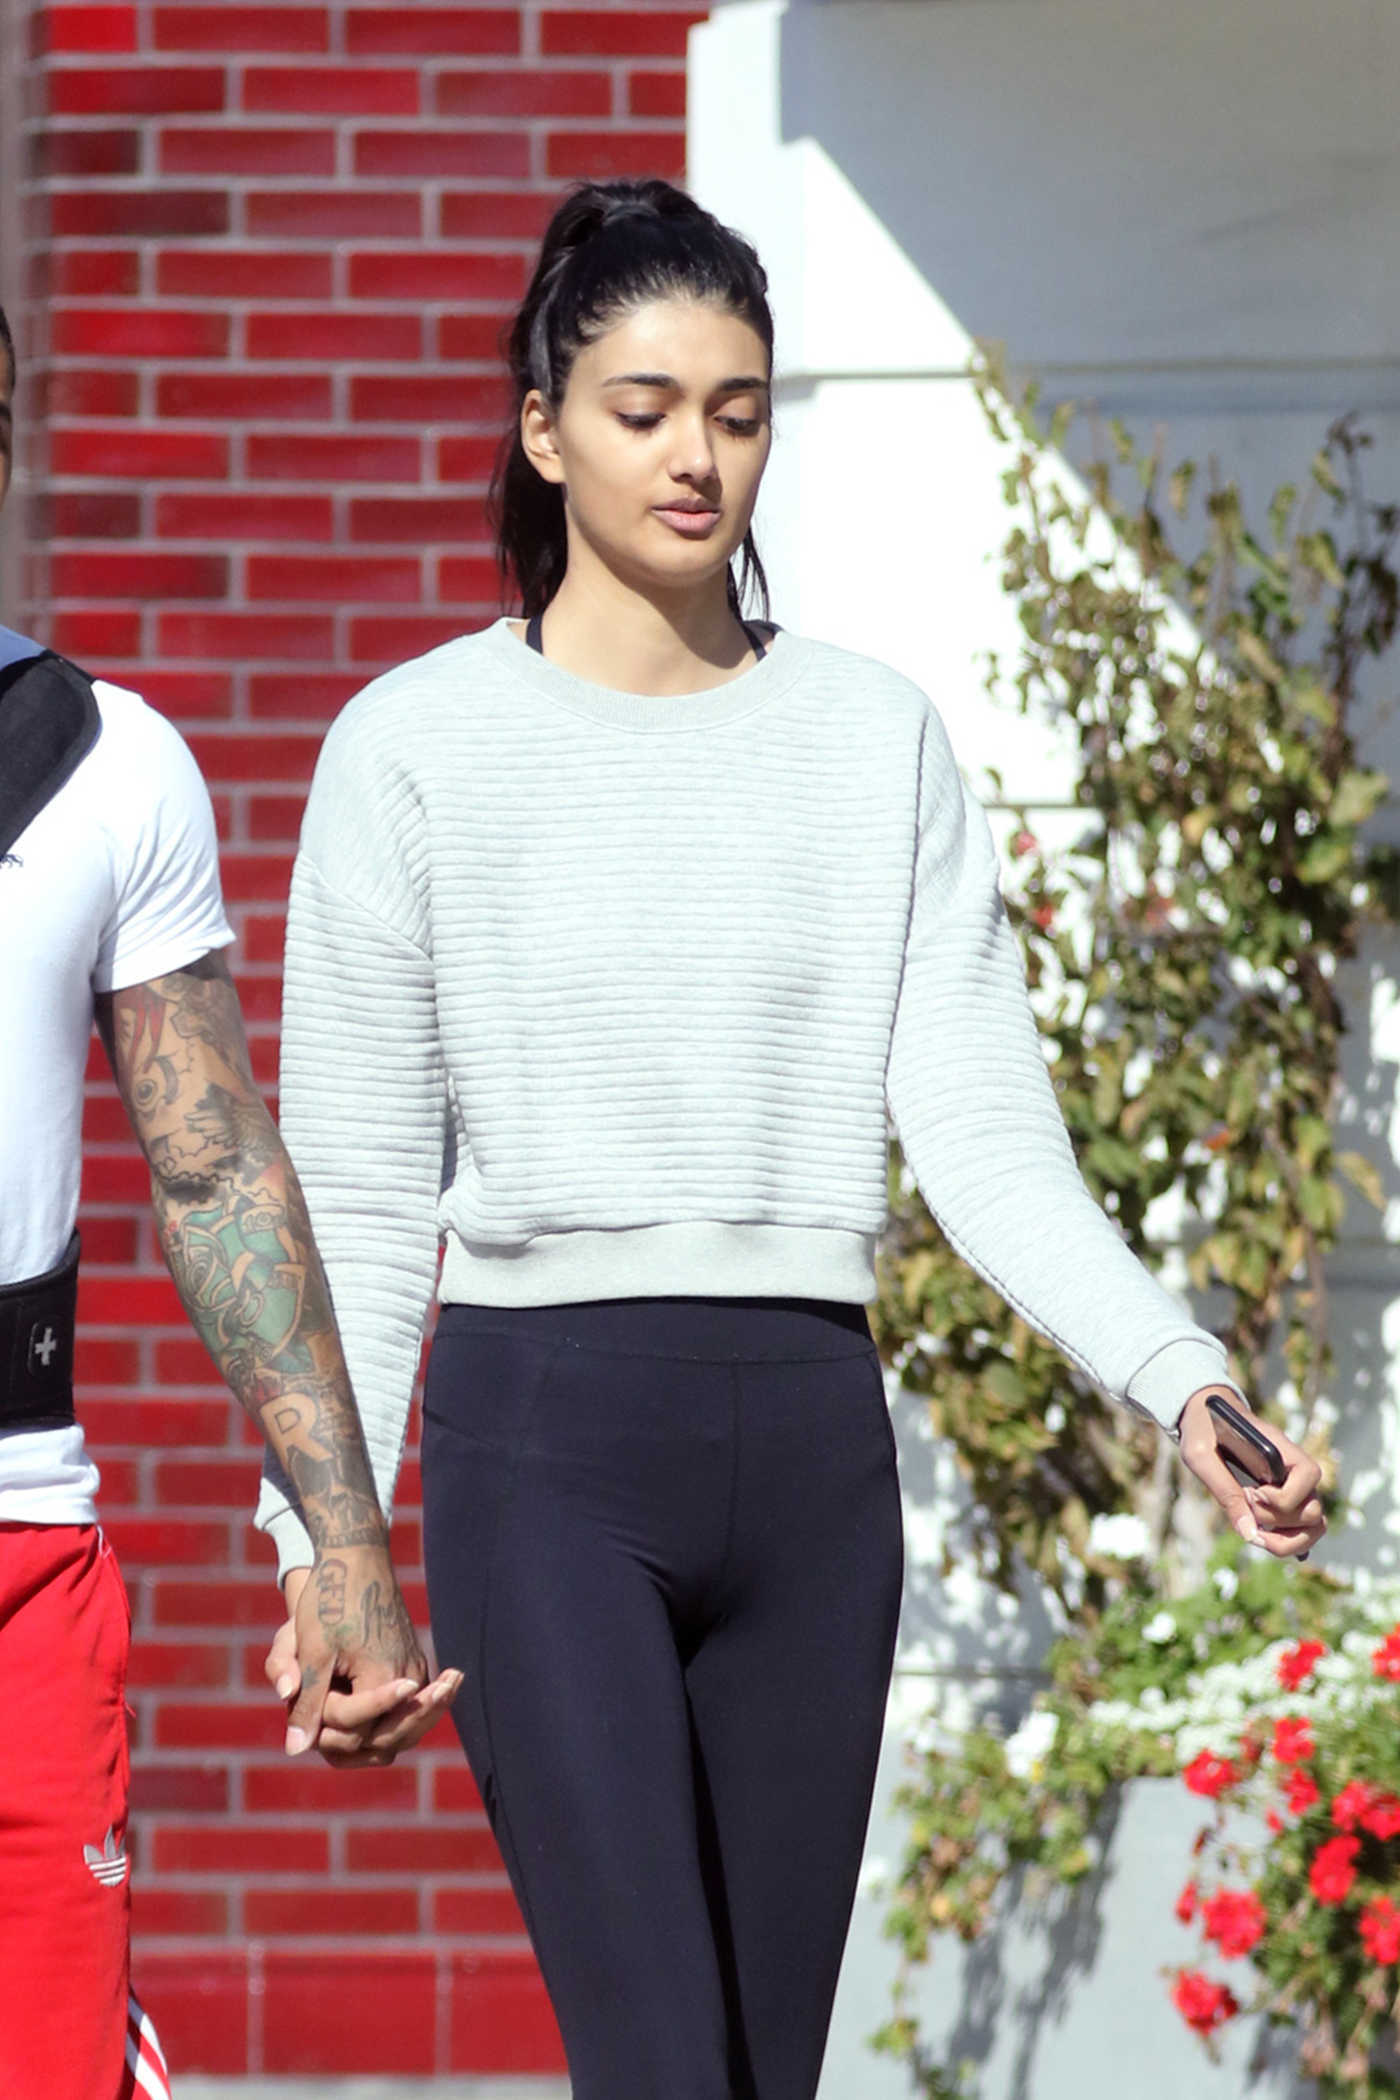 Neelam Gill With Boyfriend J Stash Was Seen Out West Hollywood 01/27/2017